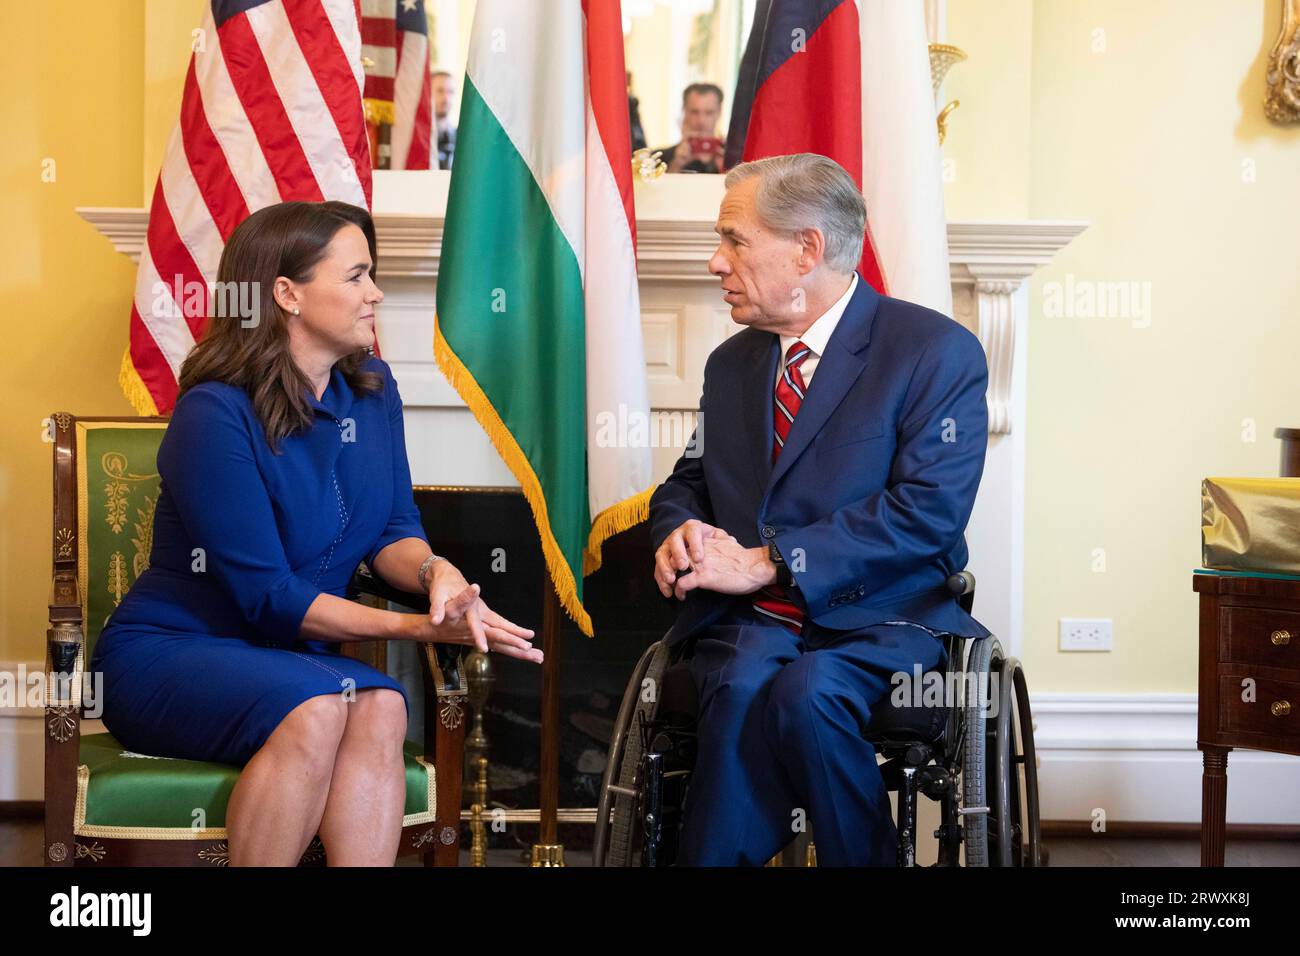 Austin Texas USA, September 21 2023: Hungarian President KATALIN NOVÁK visits with Texas Governor GREG ABBOTT at the Governor's Mansion in Austin to talk trade and economic development. Novák, who took office in 2022, is the first female president of Hungary. Credit: Bob Daemmrich/Alamy Live News Stock Photo